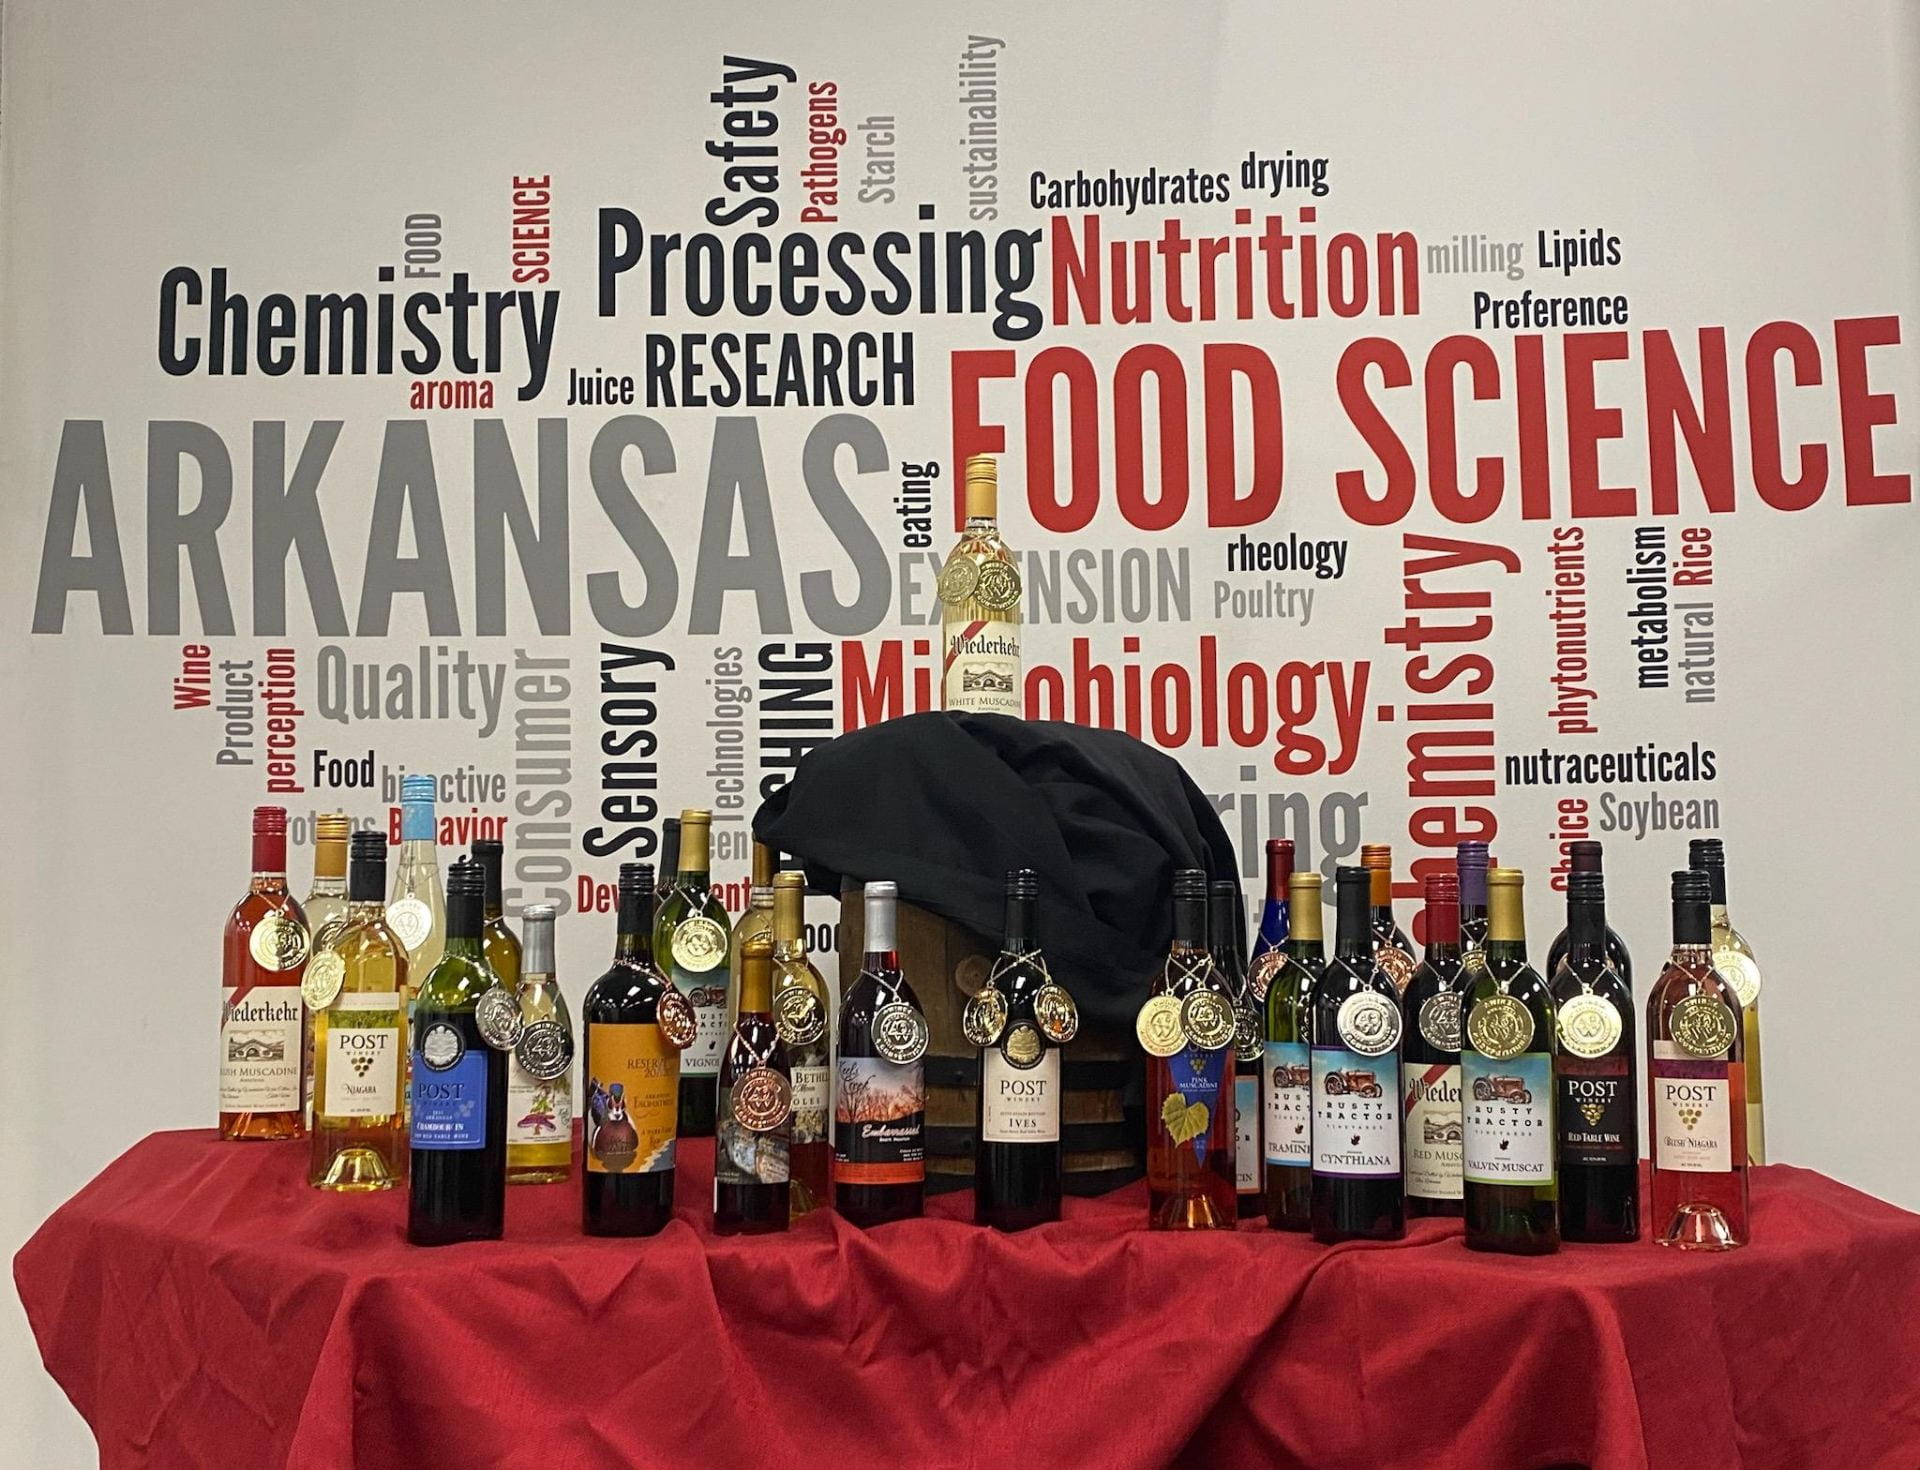 Photo of about 30 wine bottles with gold and silver medals placed on a red tablecloth in front of a word cloud poster with food science terms on it.